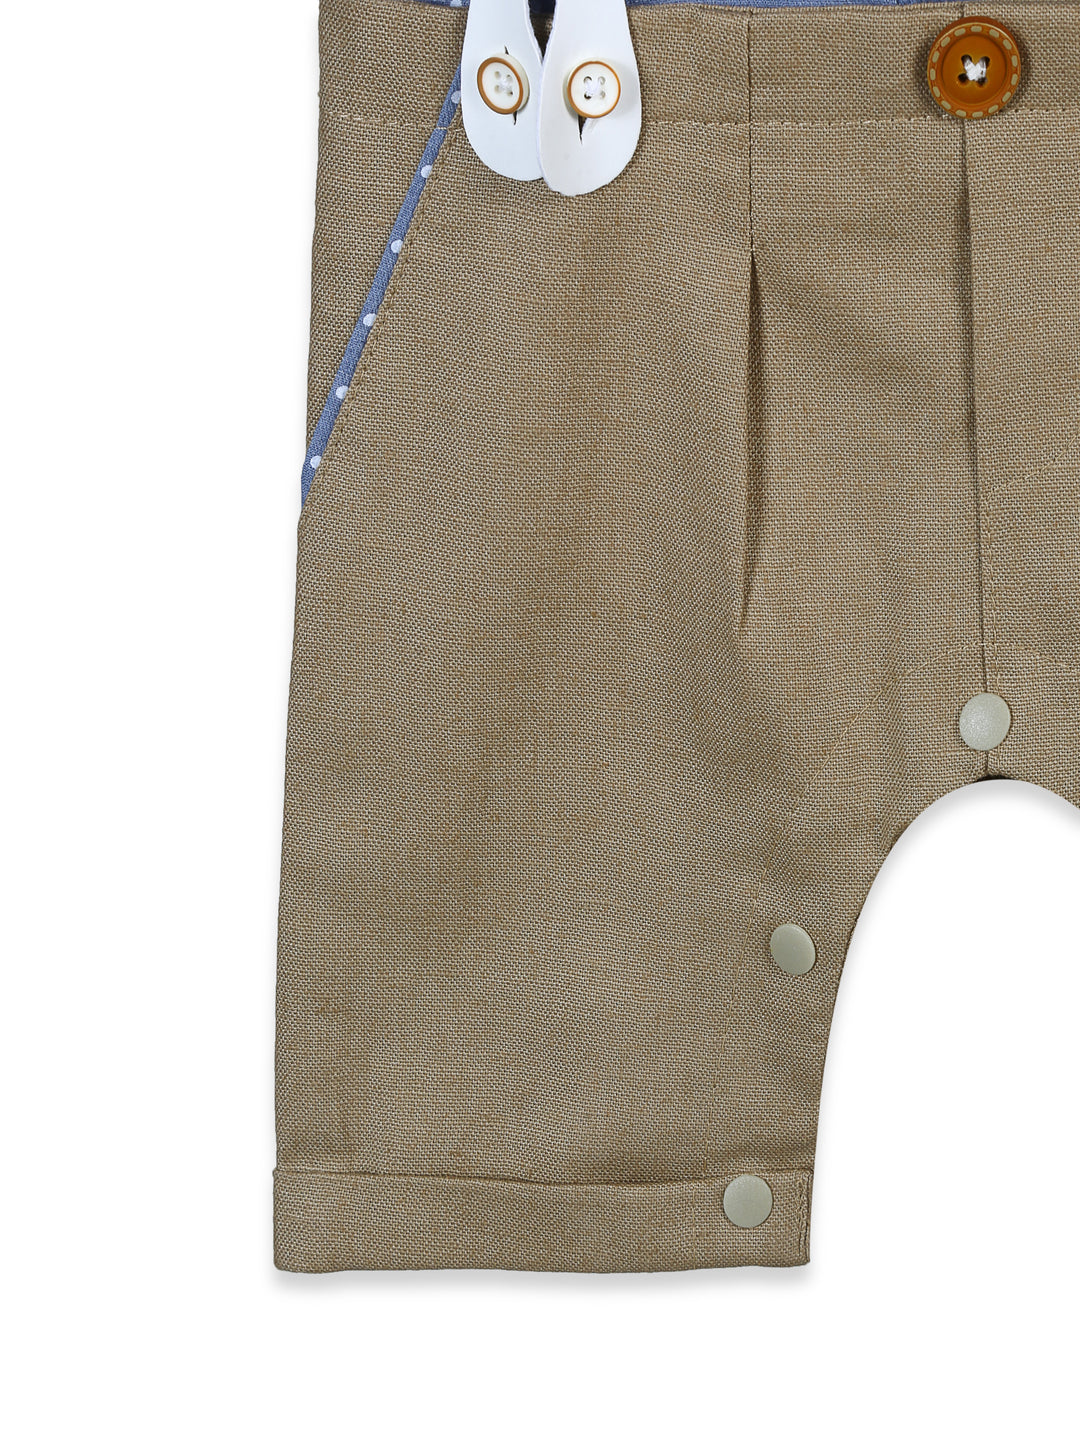 Bingobhoom Boys H/S Romper With Gallace #519 (S-24)